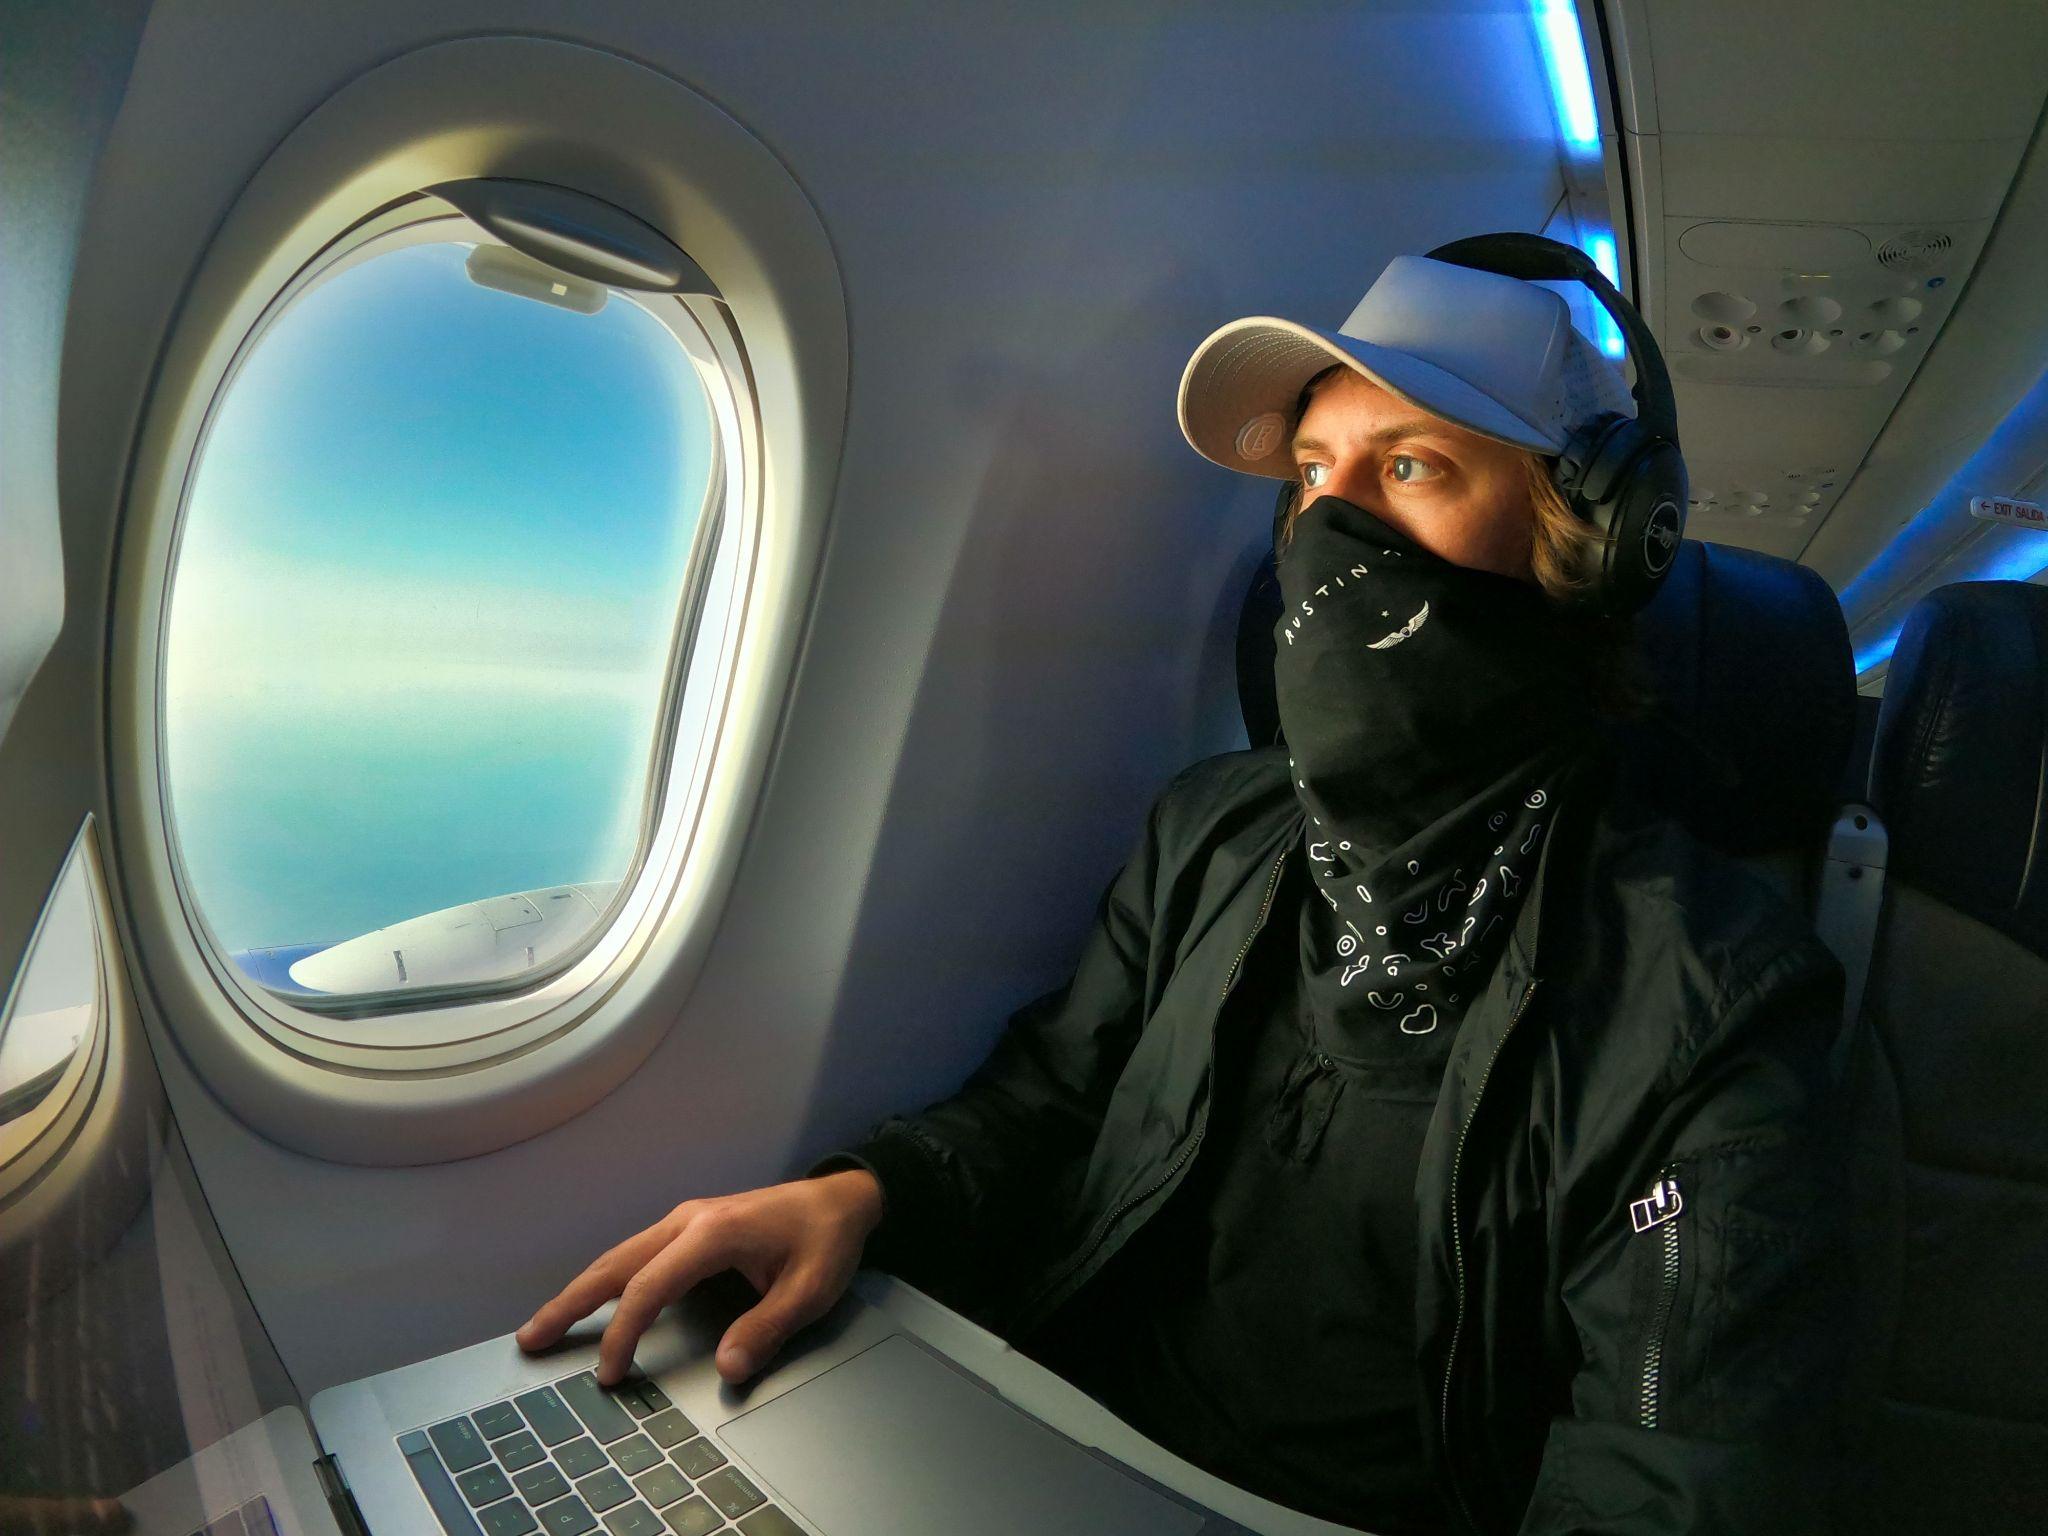 man inside a plane with laptop